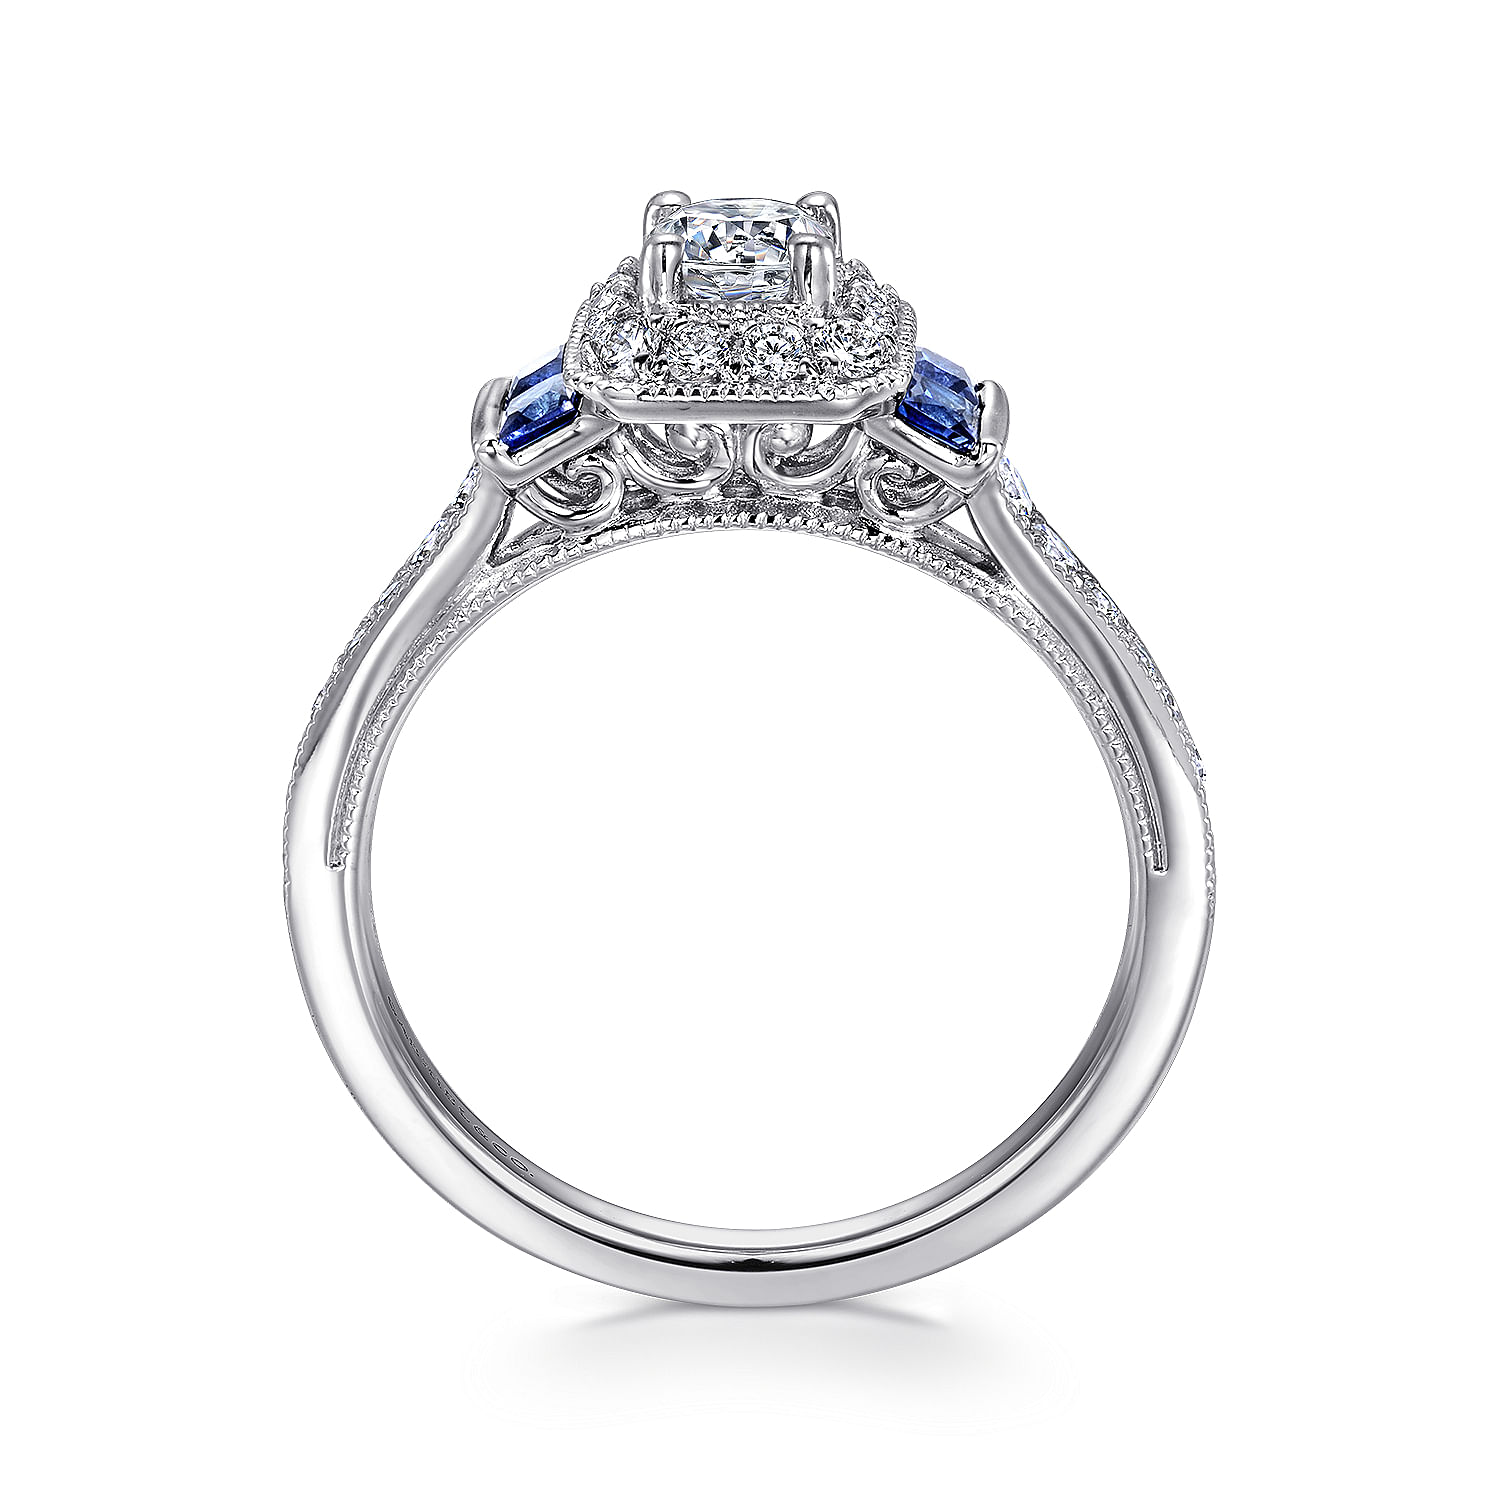 Vintage Inspired 14K White Gold Round Halo Sapphire and Diamond Complete Engagement Ring